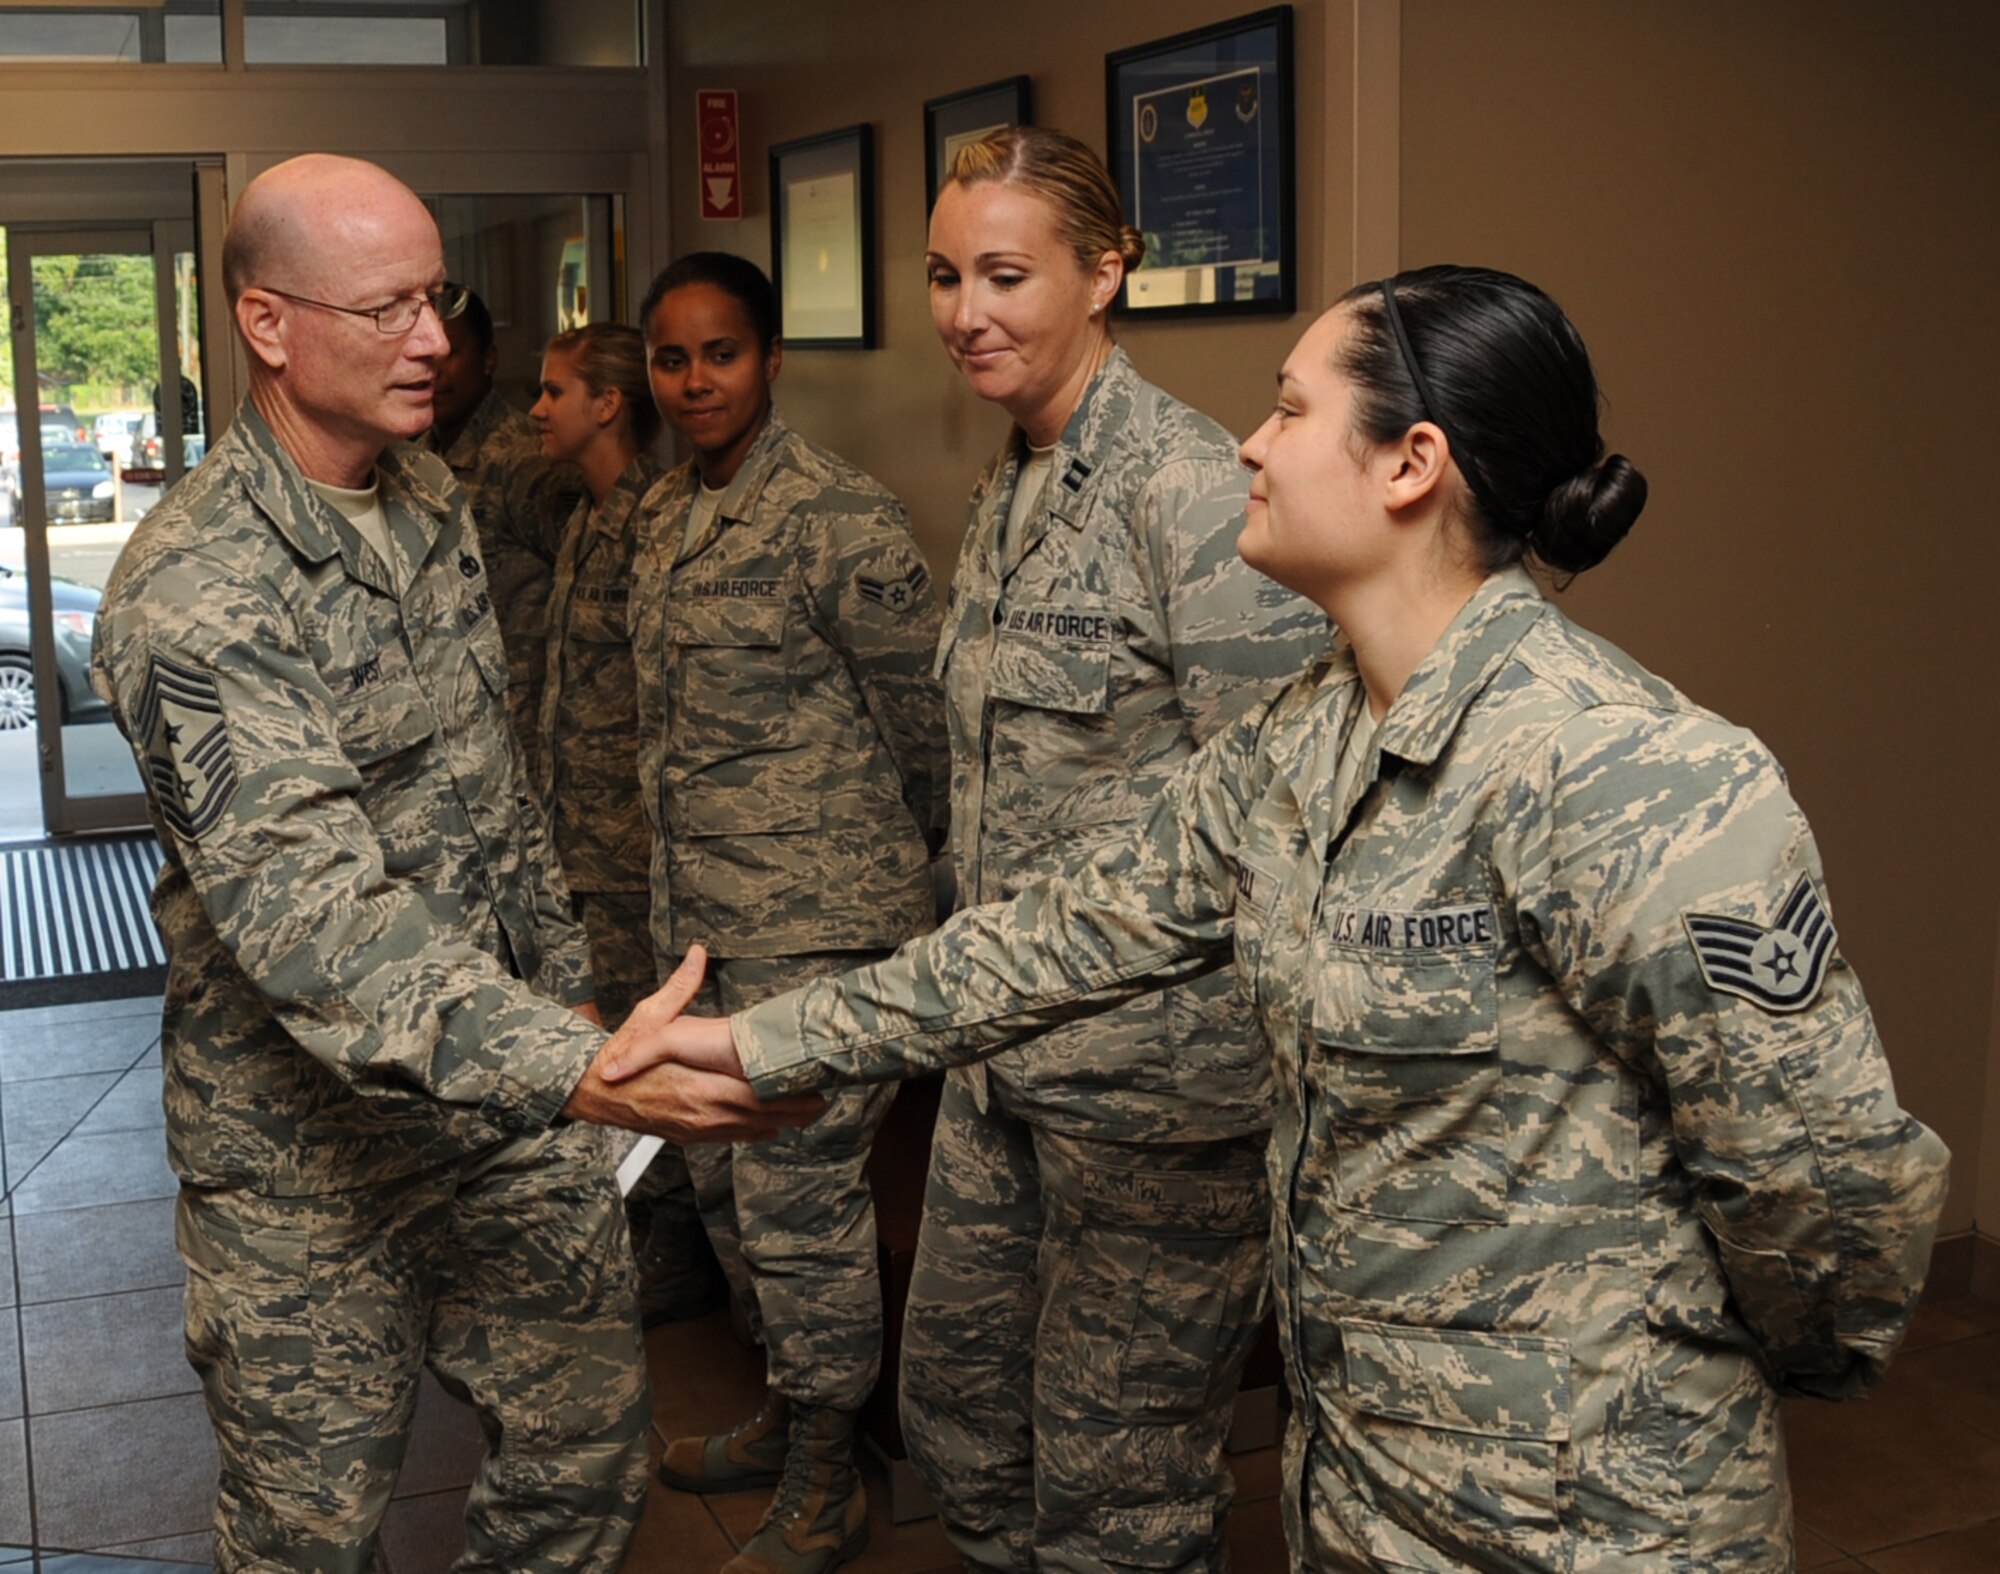 Staff Sgt. Cecily Yandell, 2nd Medical Operations Squadron immunizations technician, greets Chief Master Sgt. Terry West, 8th Air Force command chief, during his visit on Barksdale Air Force Base, La., Aug. 20, 2013. The mission statement of the 2nd Medical Group is to provide the reliability of global war fighters by optimizing their health and that of the Barksdale community with medics prepared to execute their professional responsibilities. (U.S. Air Force photo/Senior Airman Sean Martin)